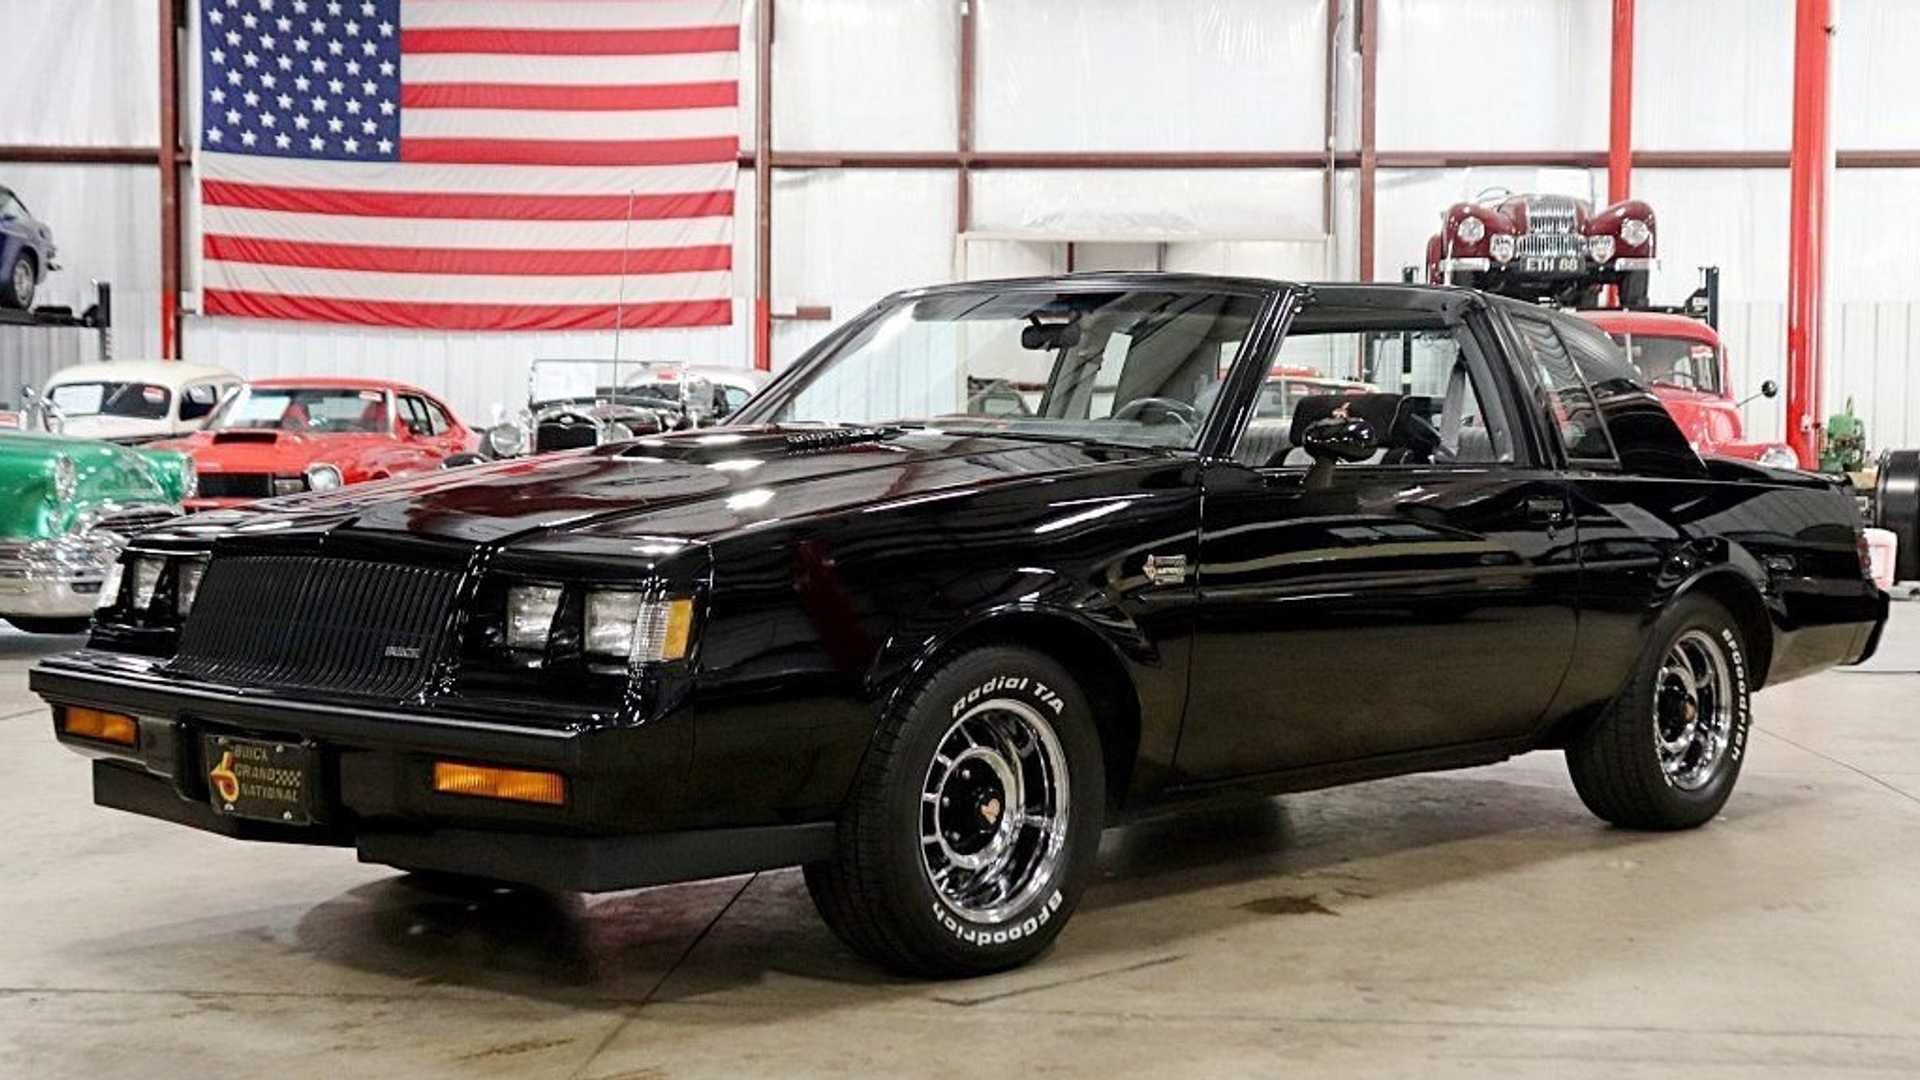 Buick Grand National Is The Performance Car You Crave. Motor1.com Photo